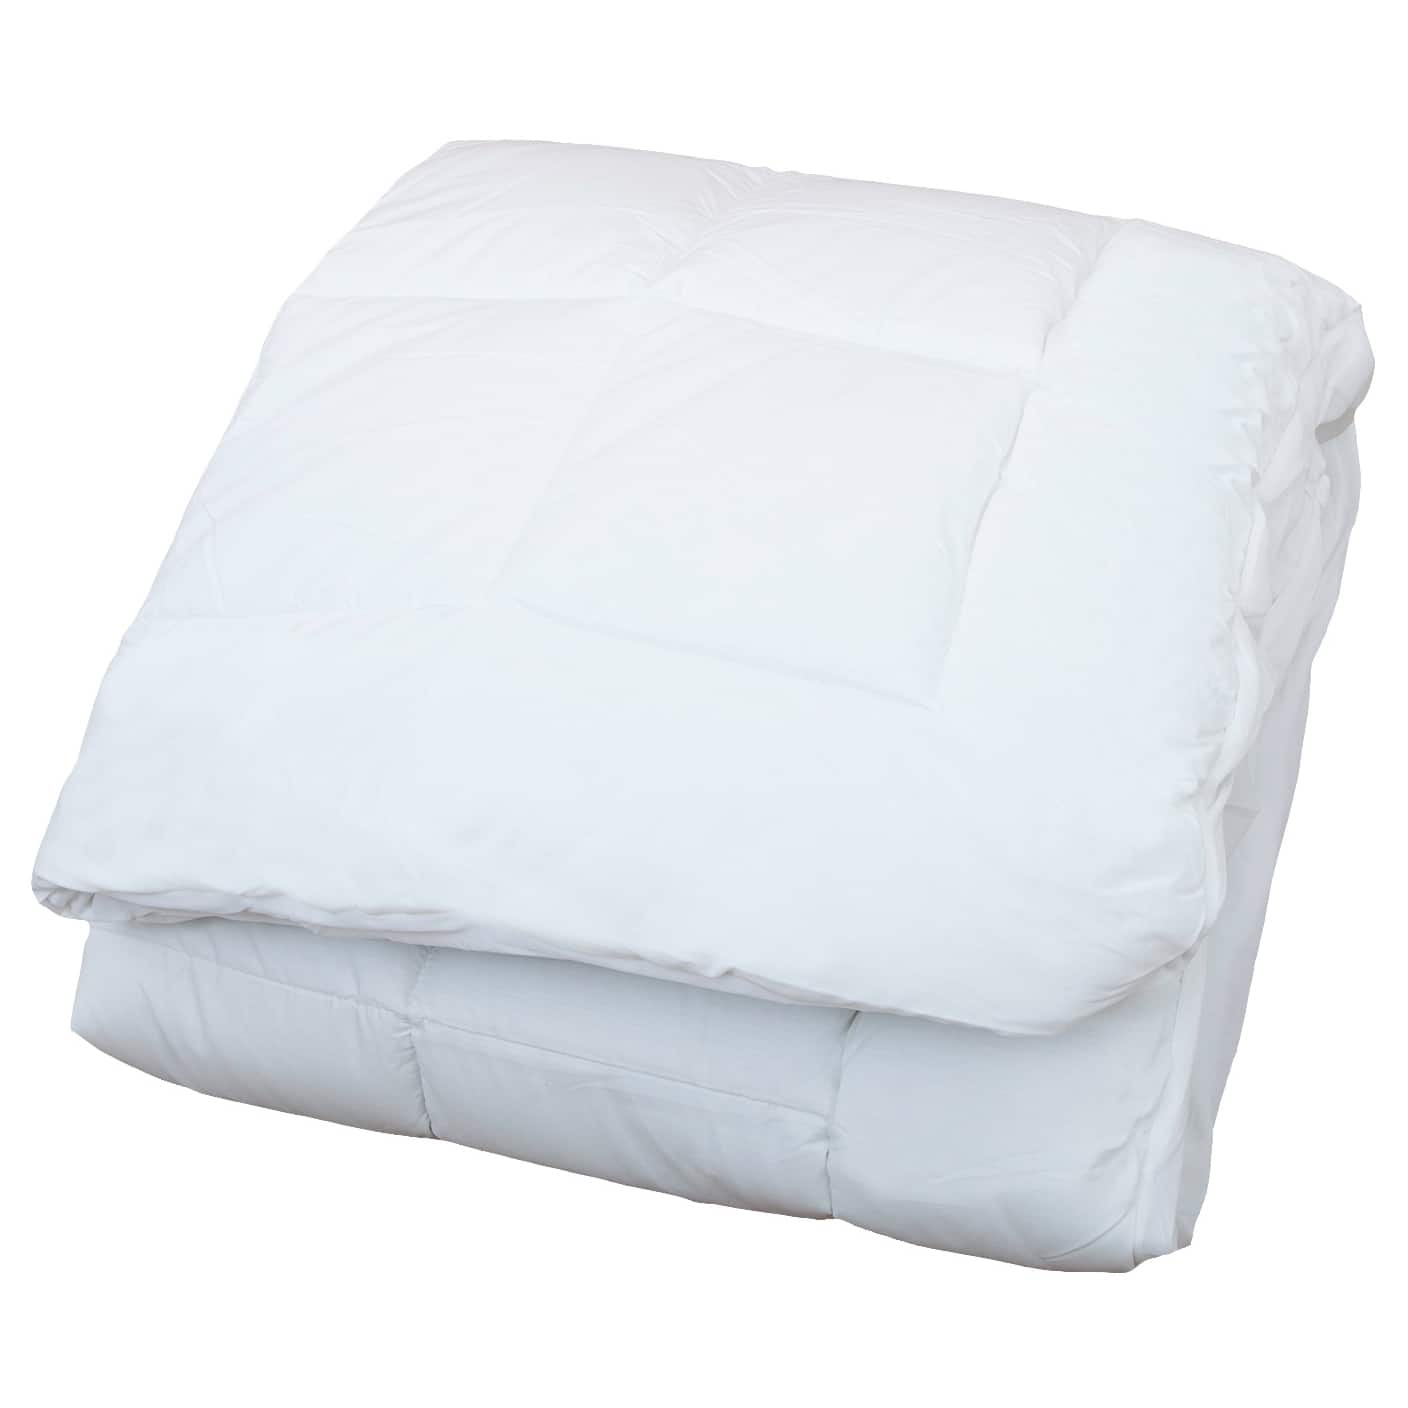 Classic Linen Marbella Box Quilted Waterproof Mattress Pad - White ...